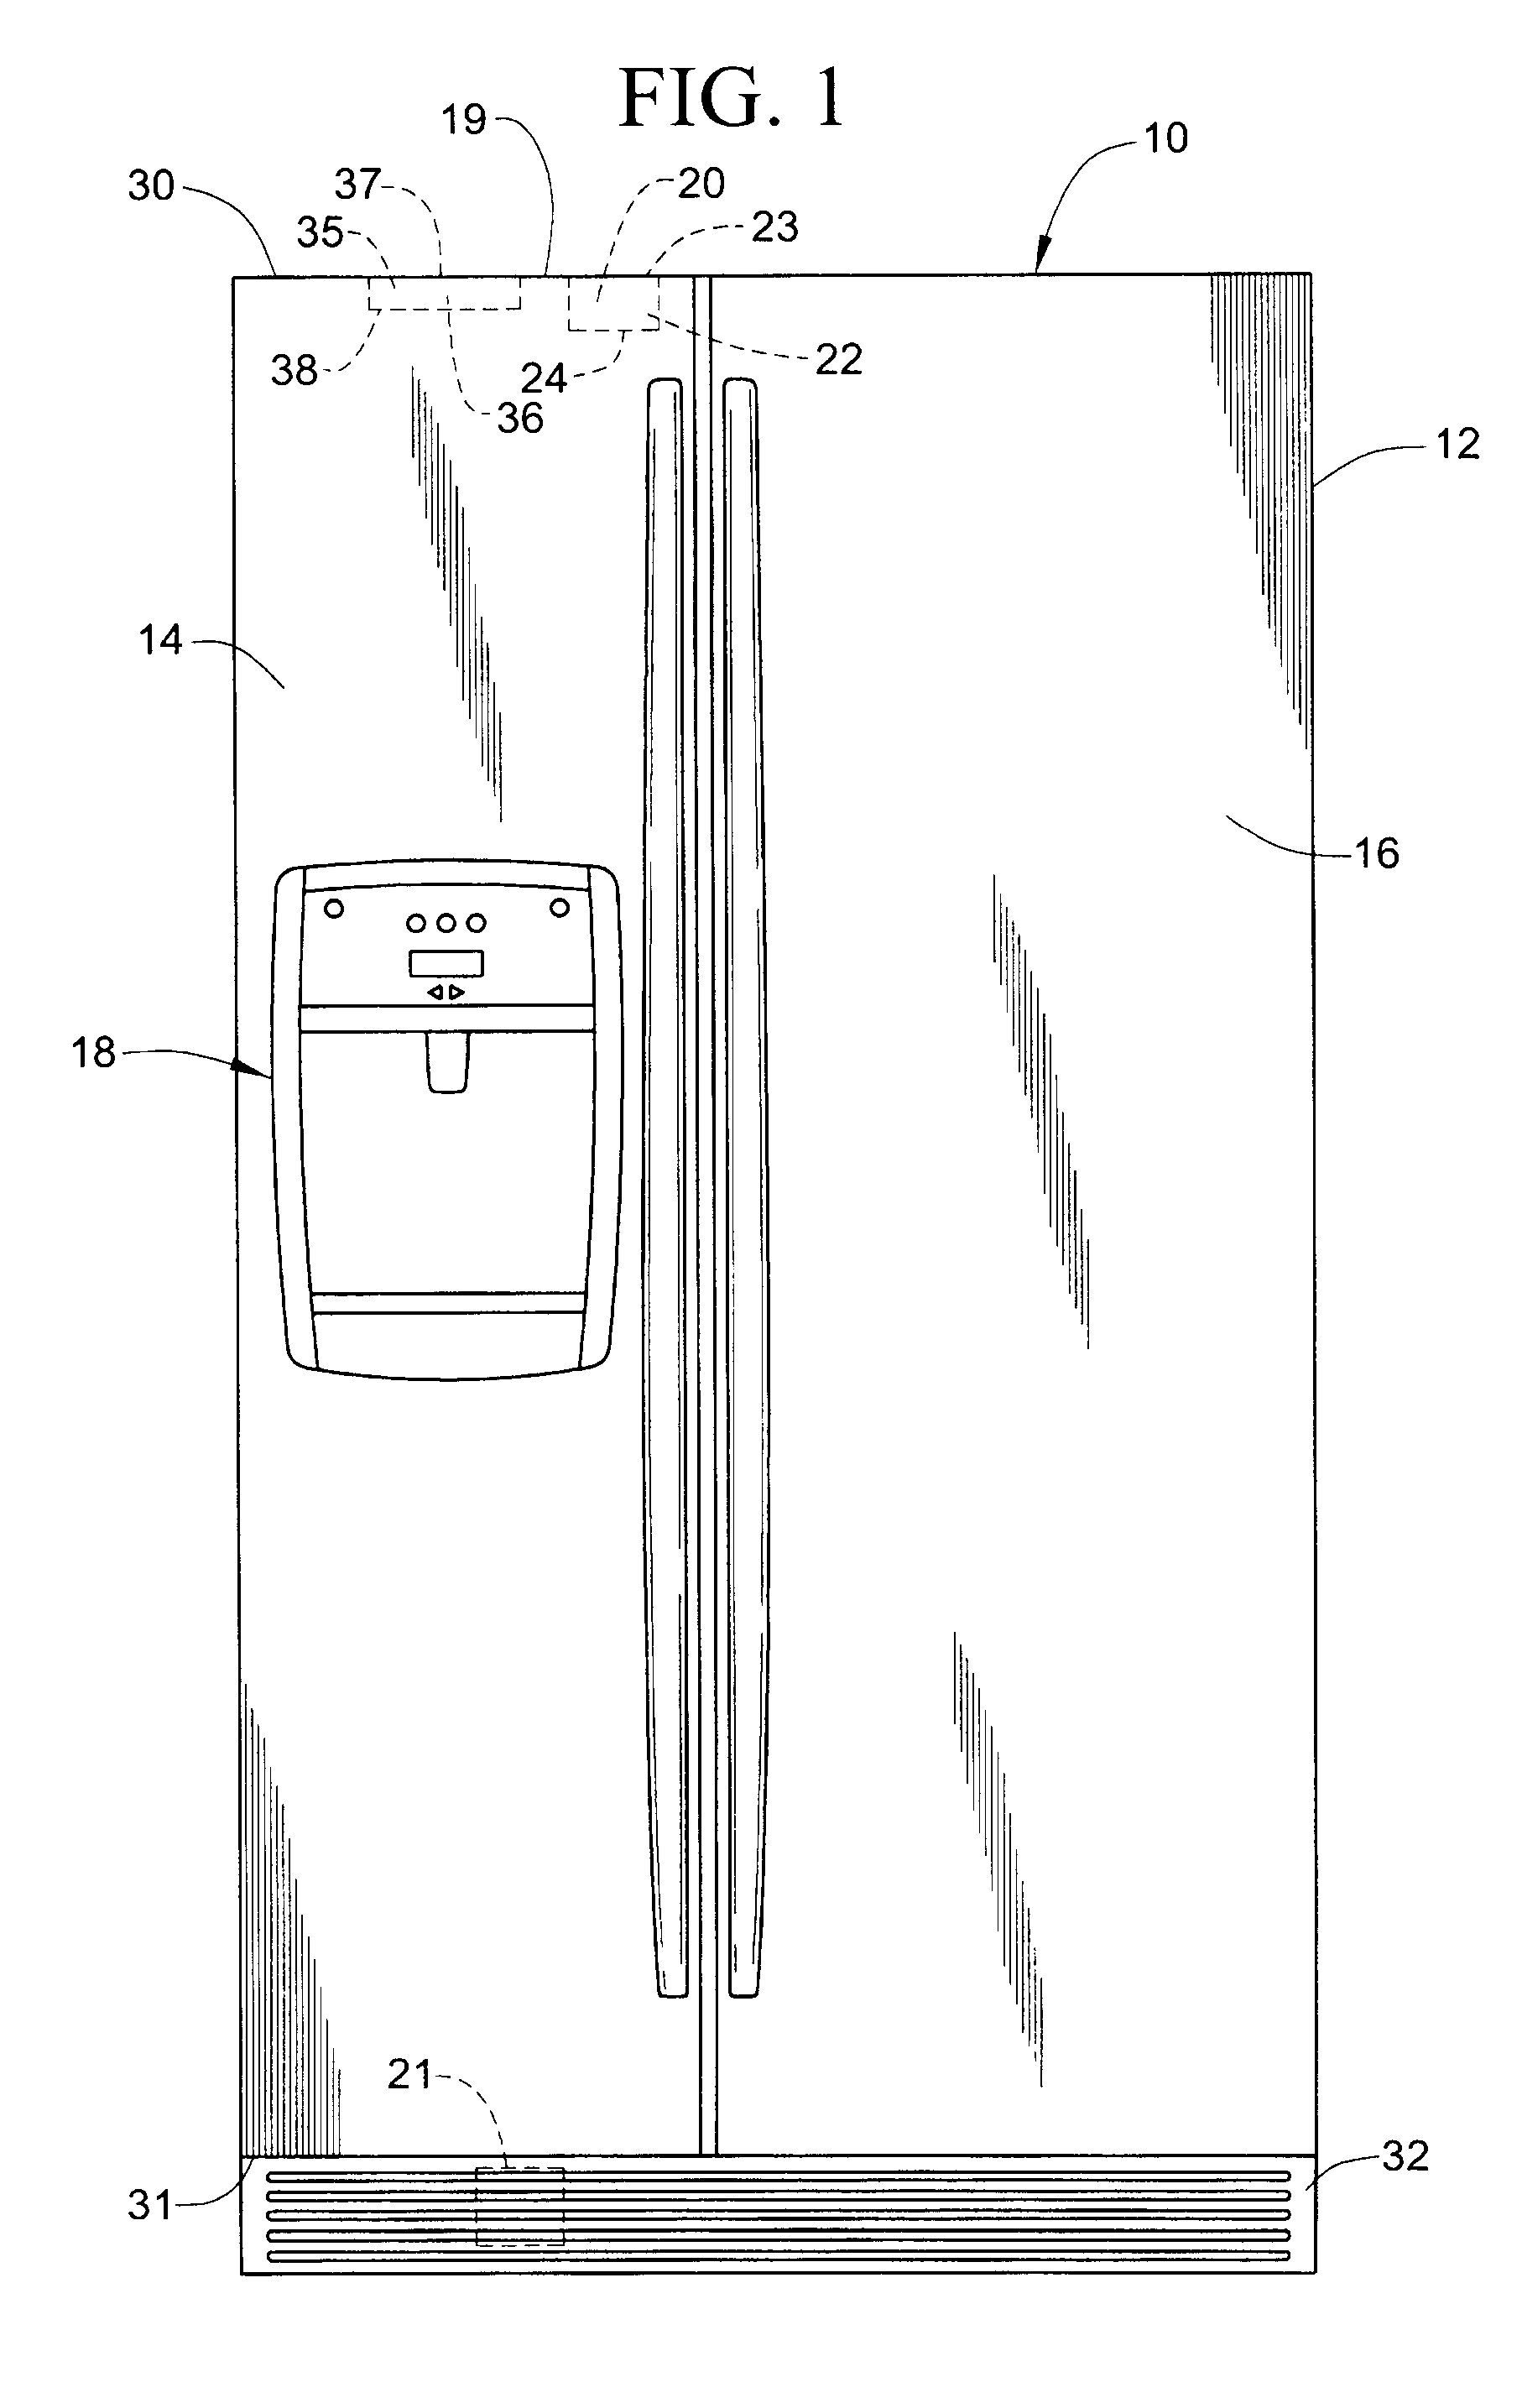 Refrigerator with plug-in power supply